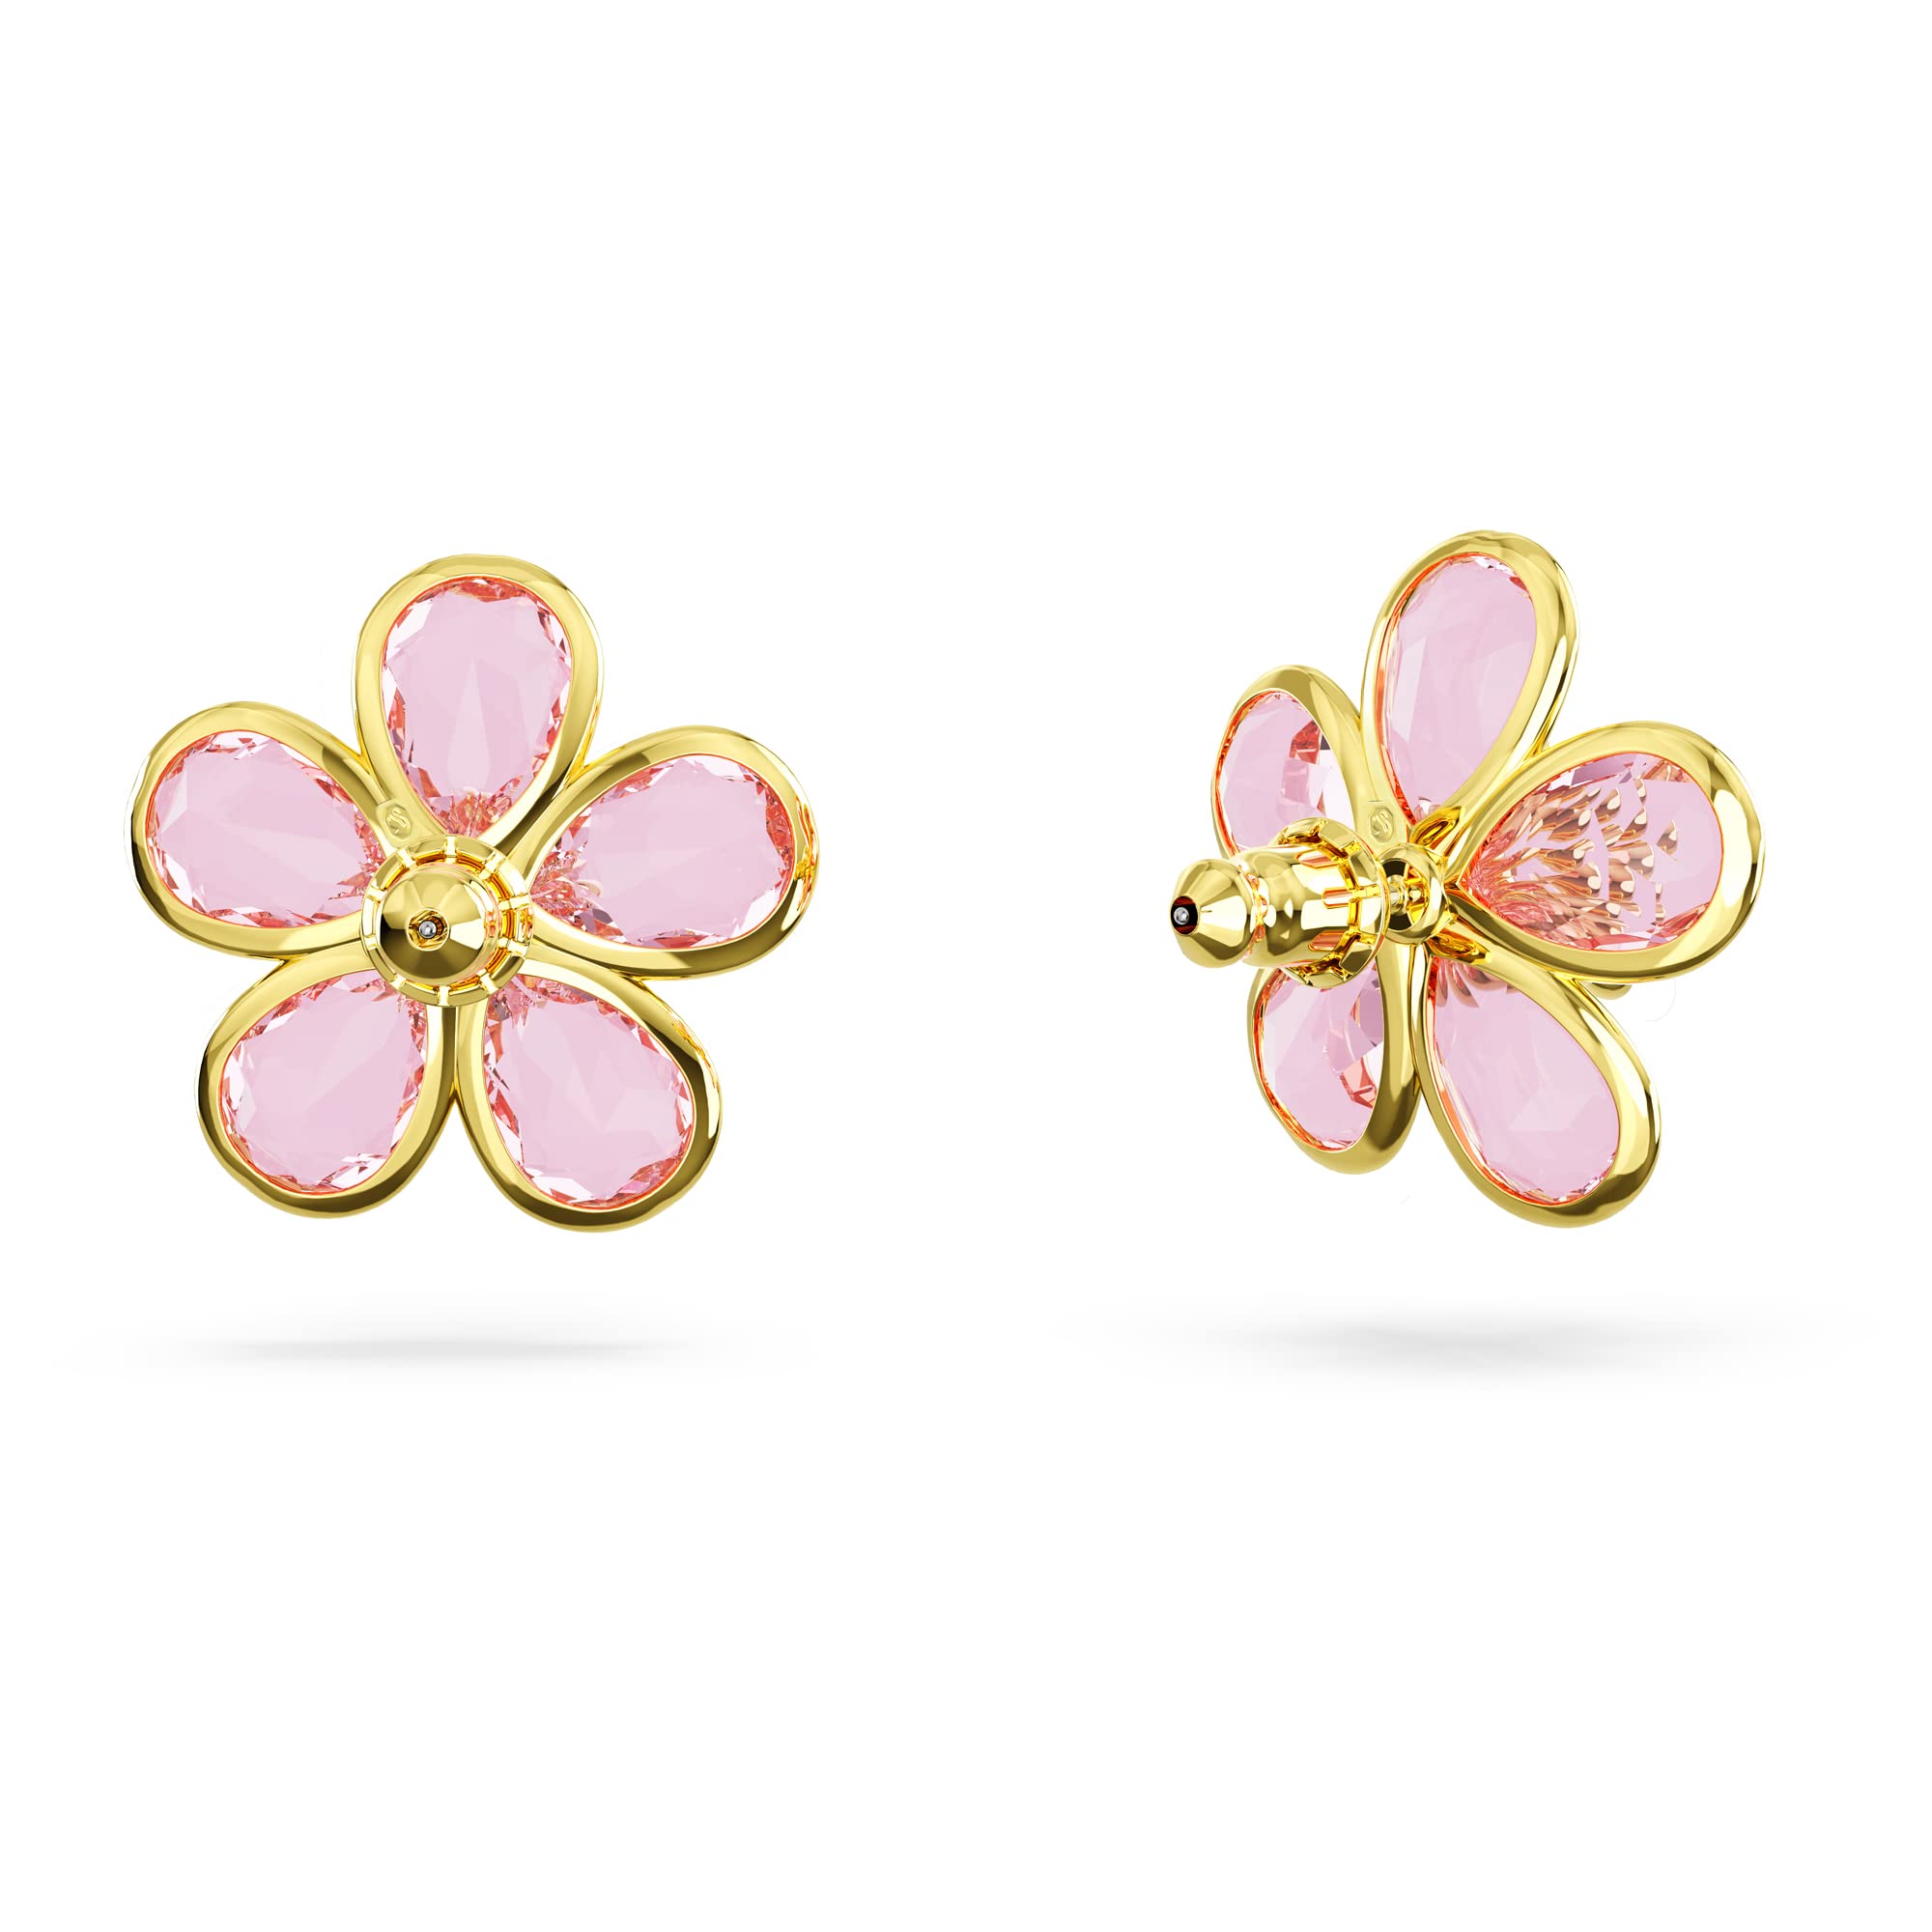 Swarovski Florere Pierced Stud Earrings with Yellow Crystals in Flower Motif on Gold-Tone Finish, Part of the Swarovski Florere Collection